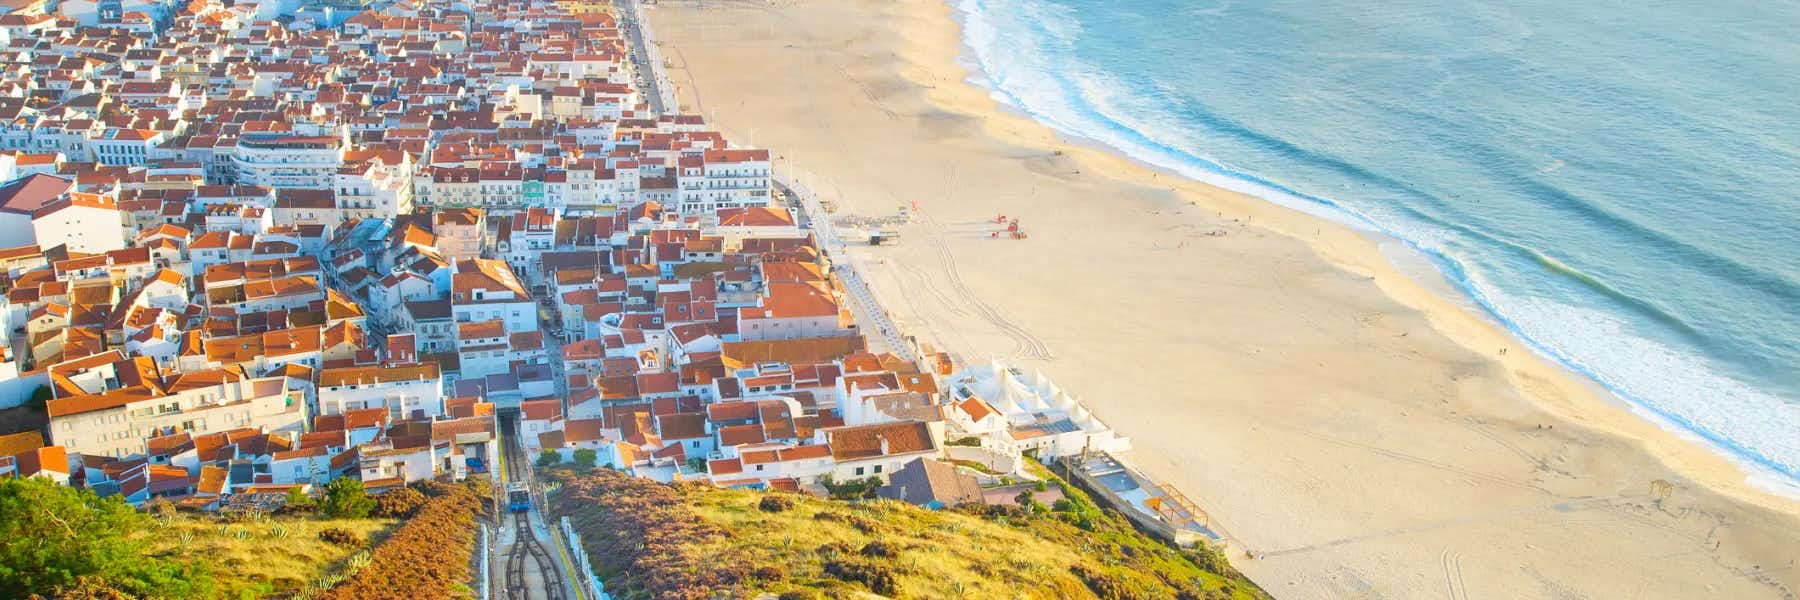 A Dream Home and an Easy Life on Portugal’s Silver Coast